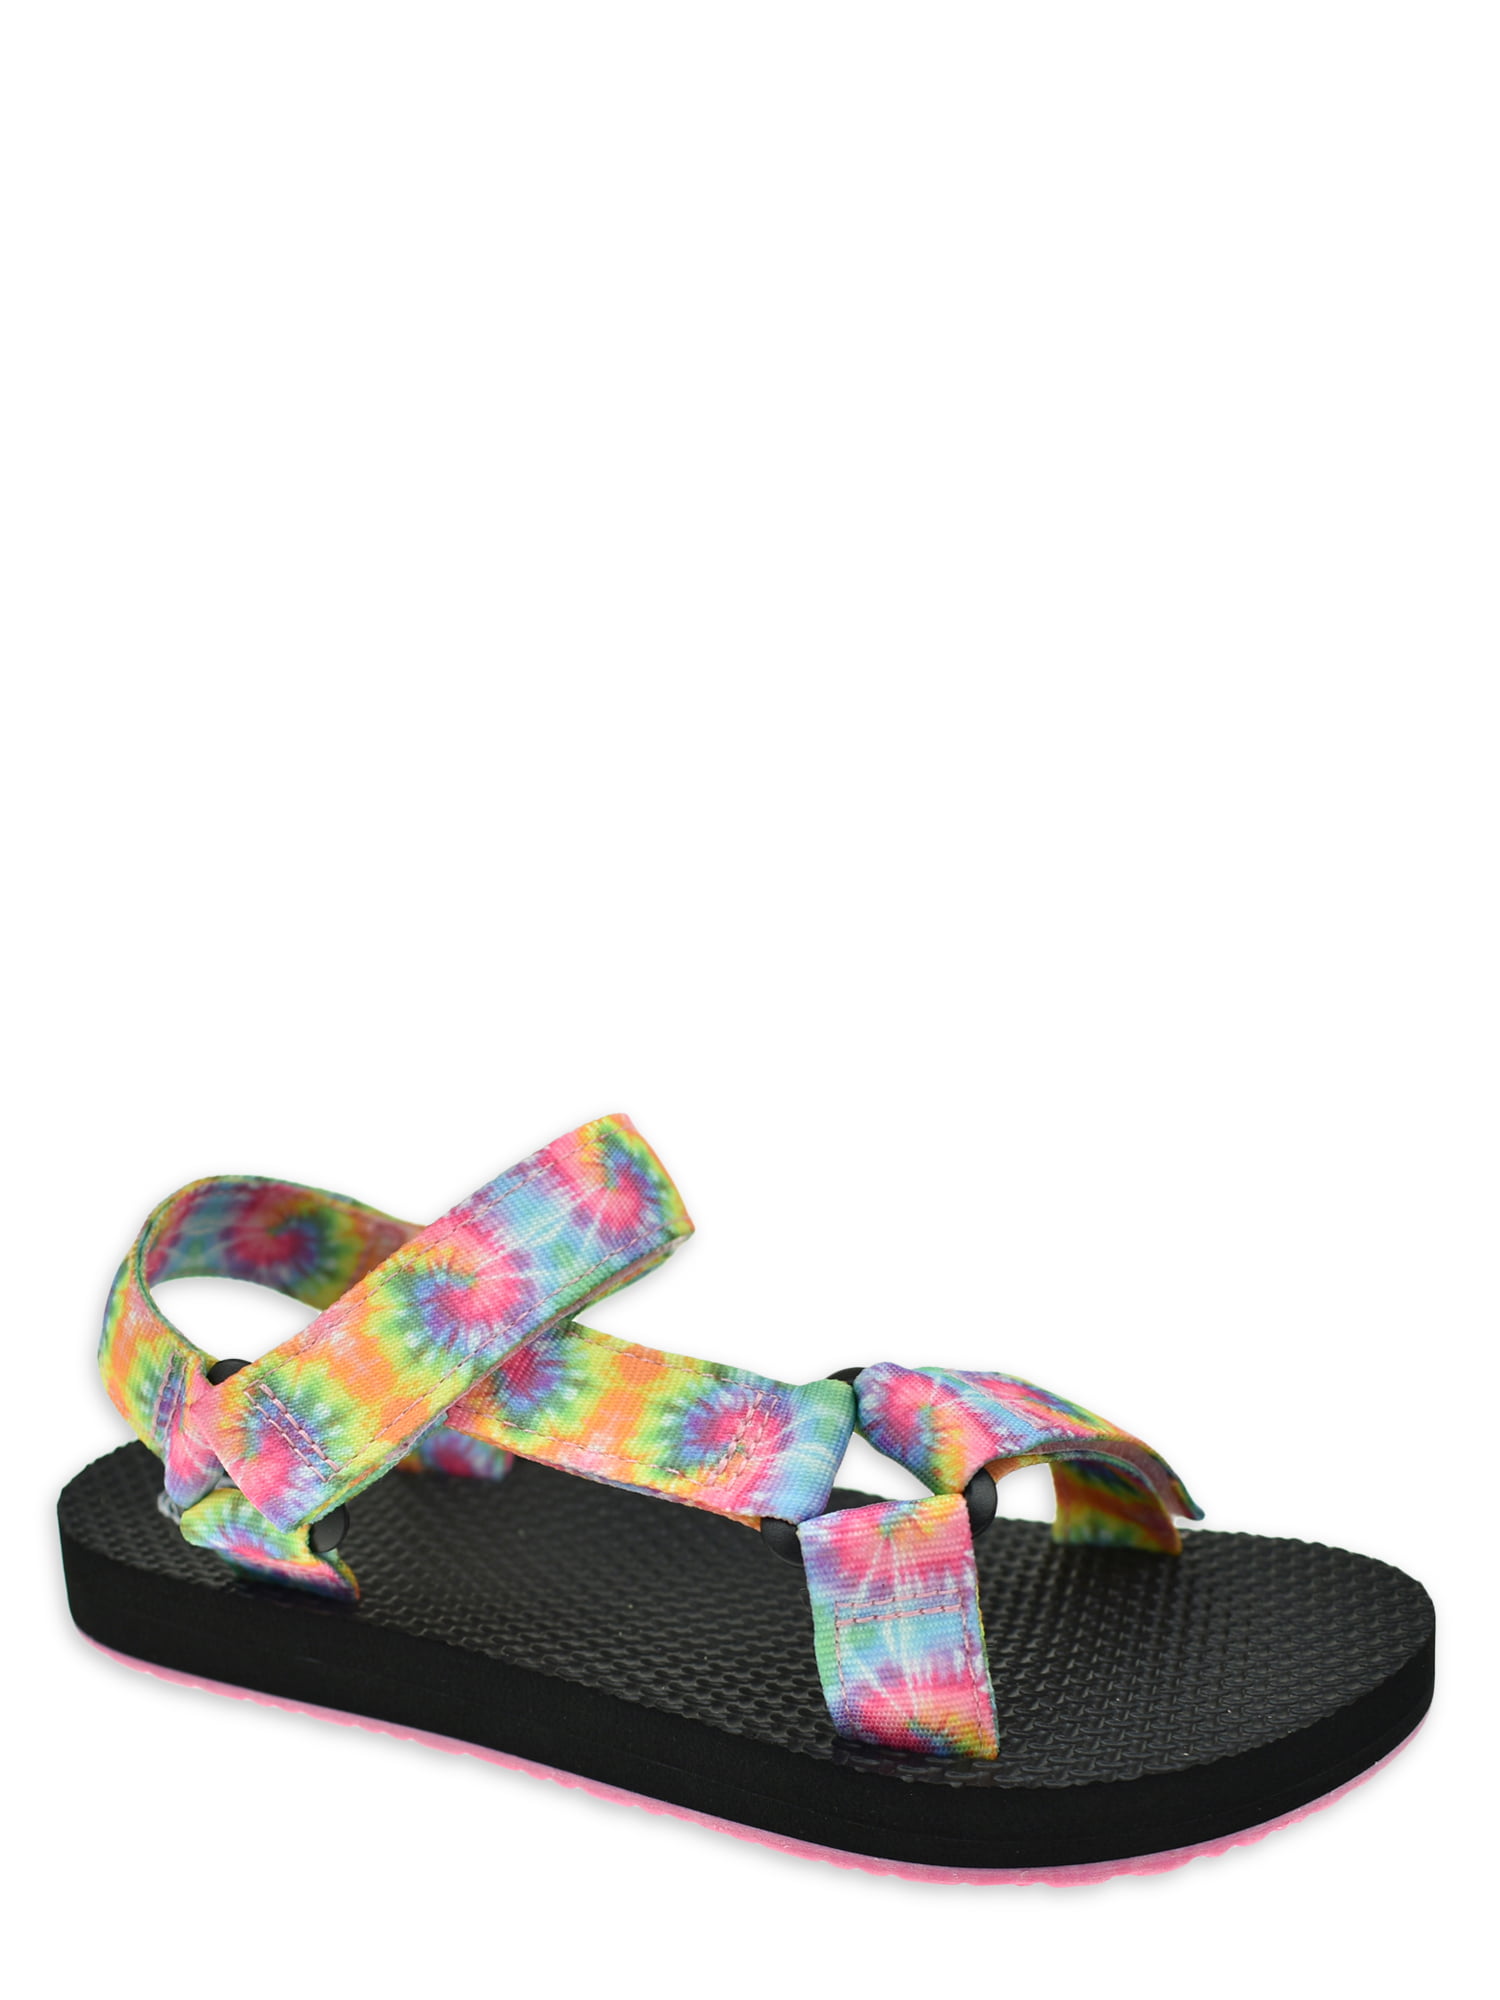 FADED GLORY 2 Premium Flip Flop Jewel Dsign Sandals Youth Girls Size 12 13 